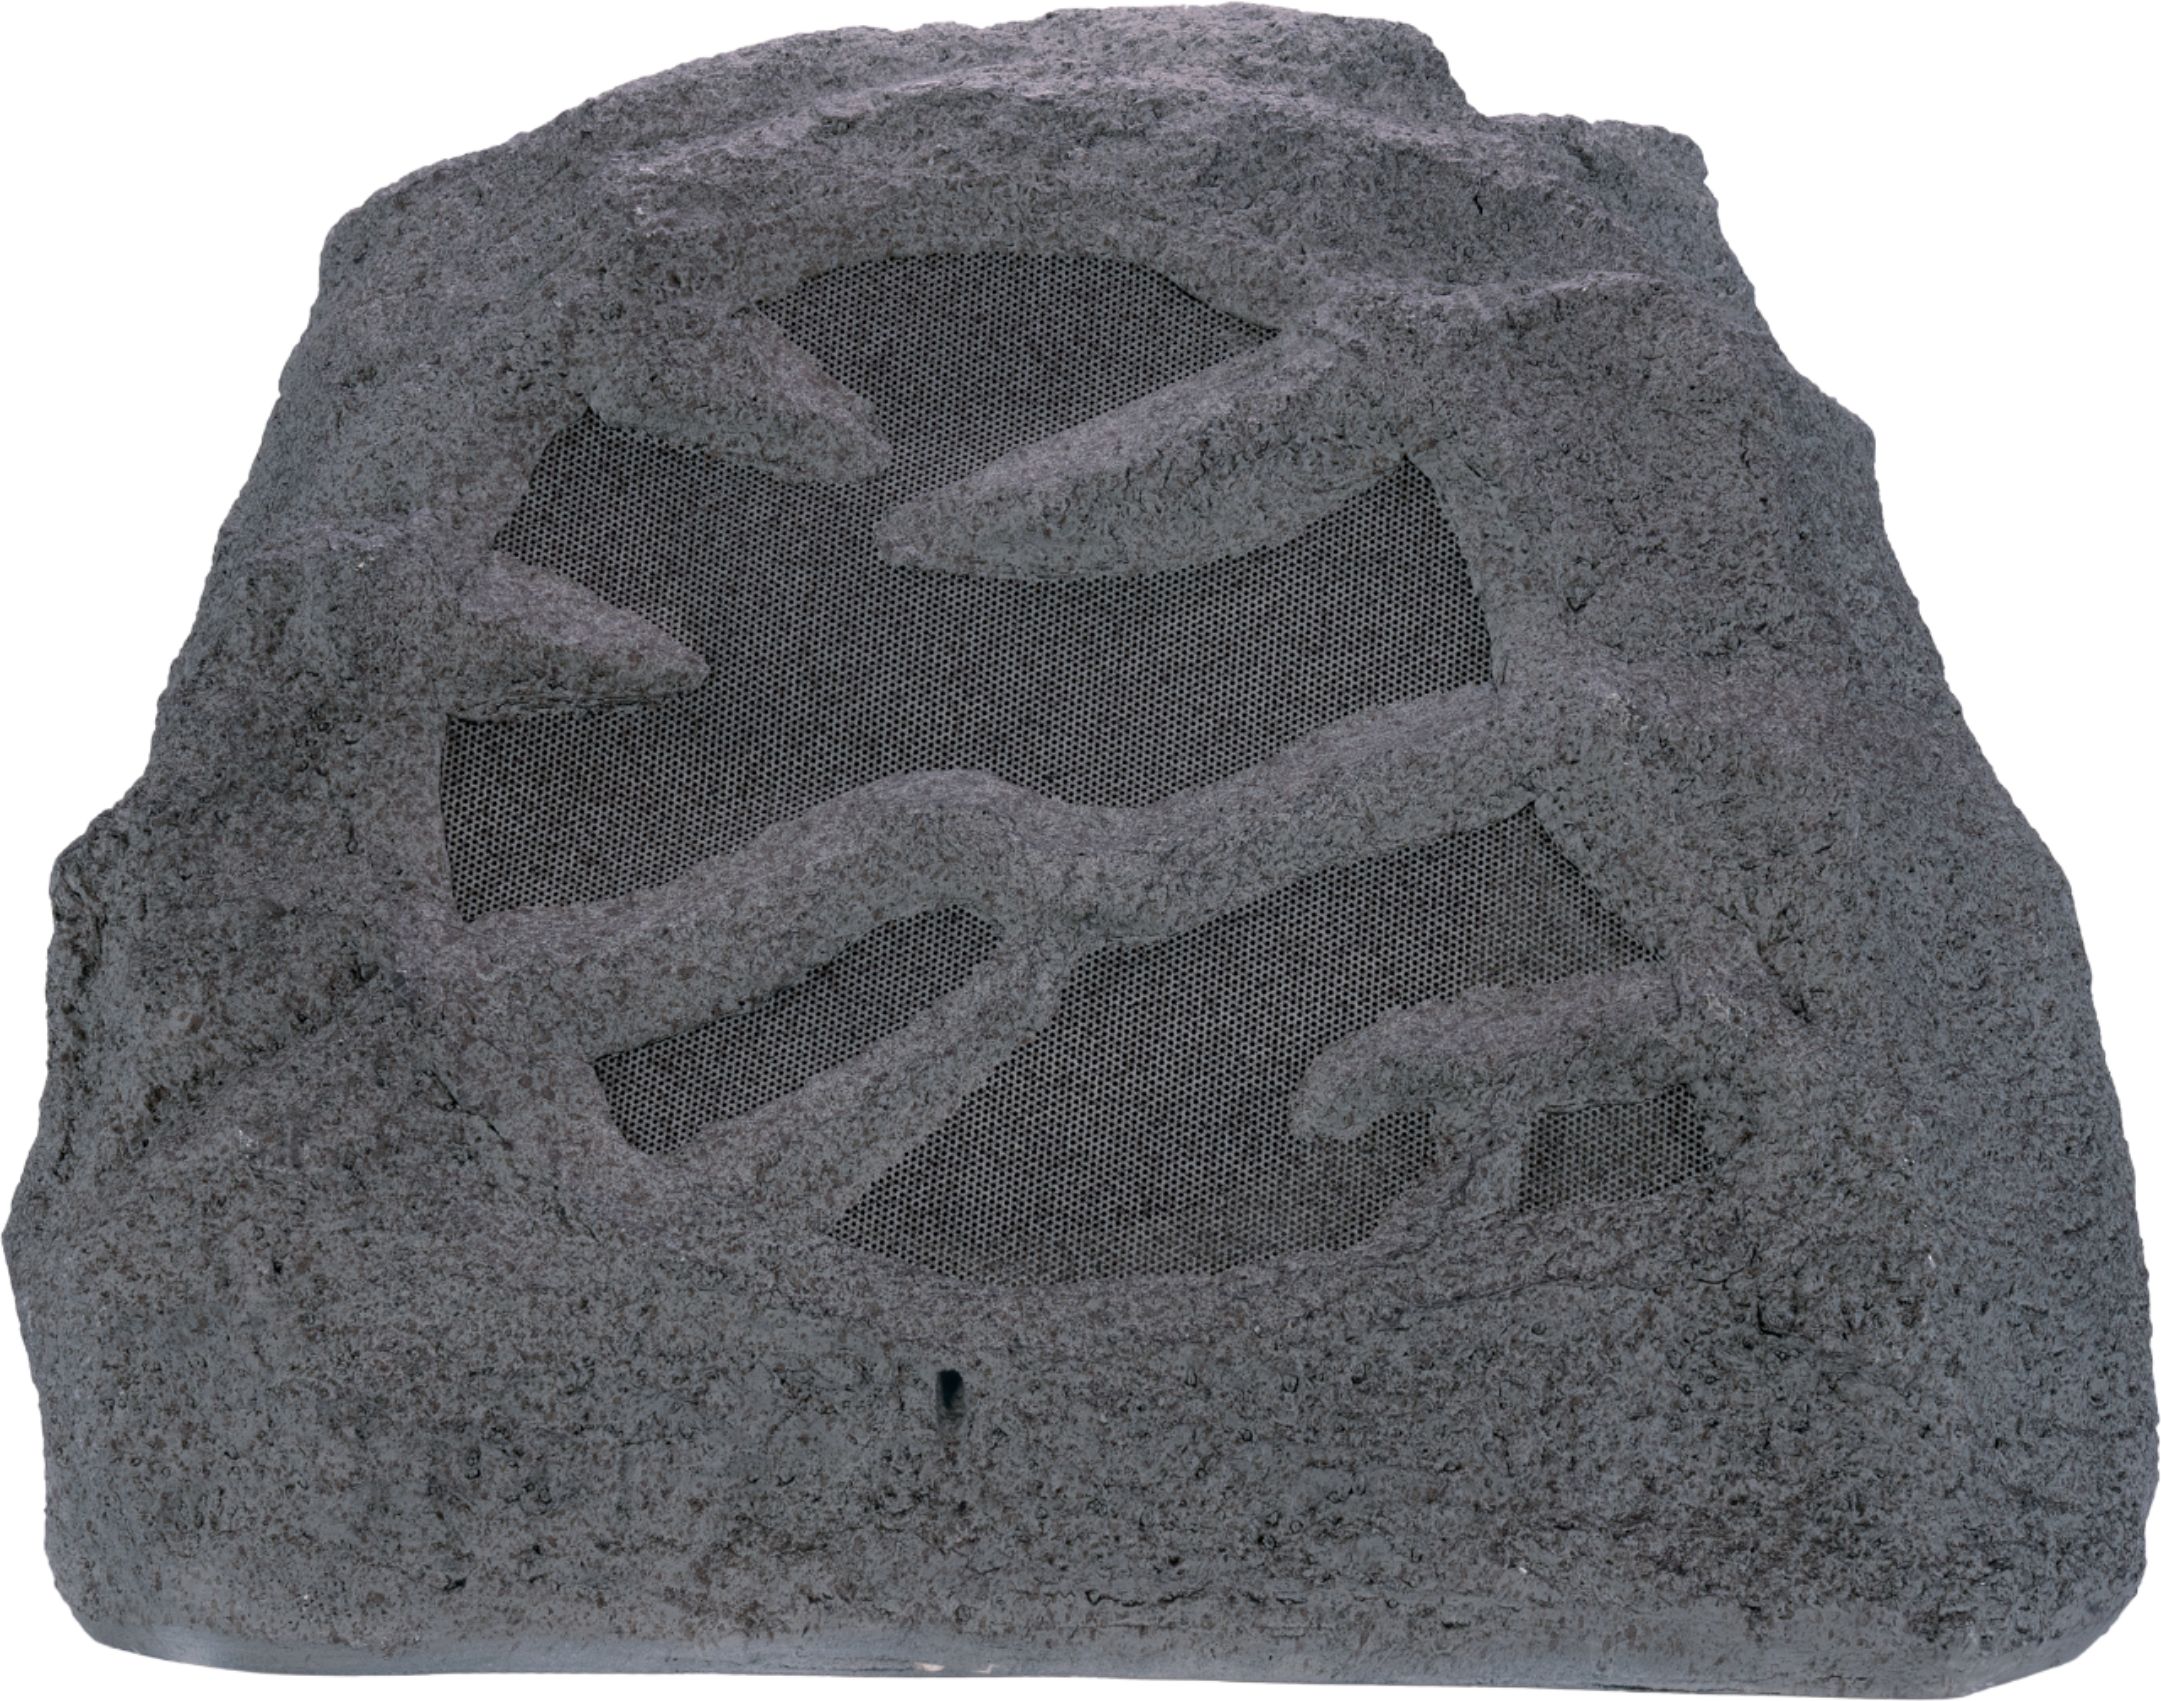 Angle View: Sonance - MAGROCKS2.1 - Mag Series 2.1-Ch. Outdoor Rock Speaker System (Each) - Charcoal Gray Granite